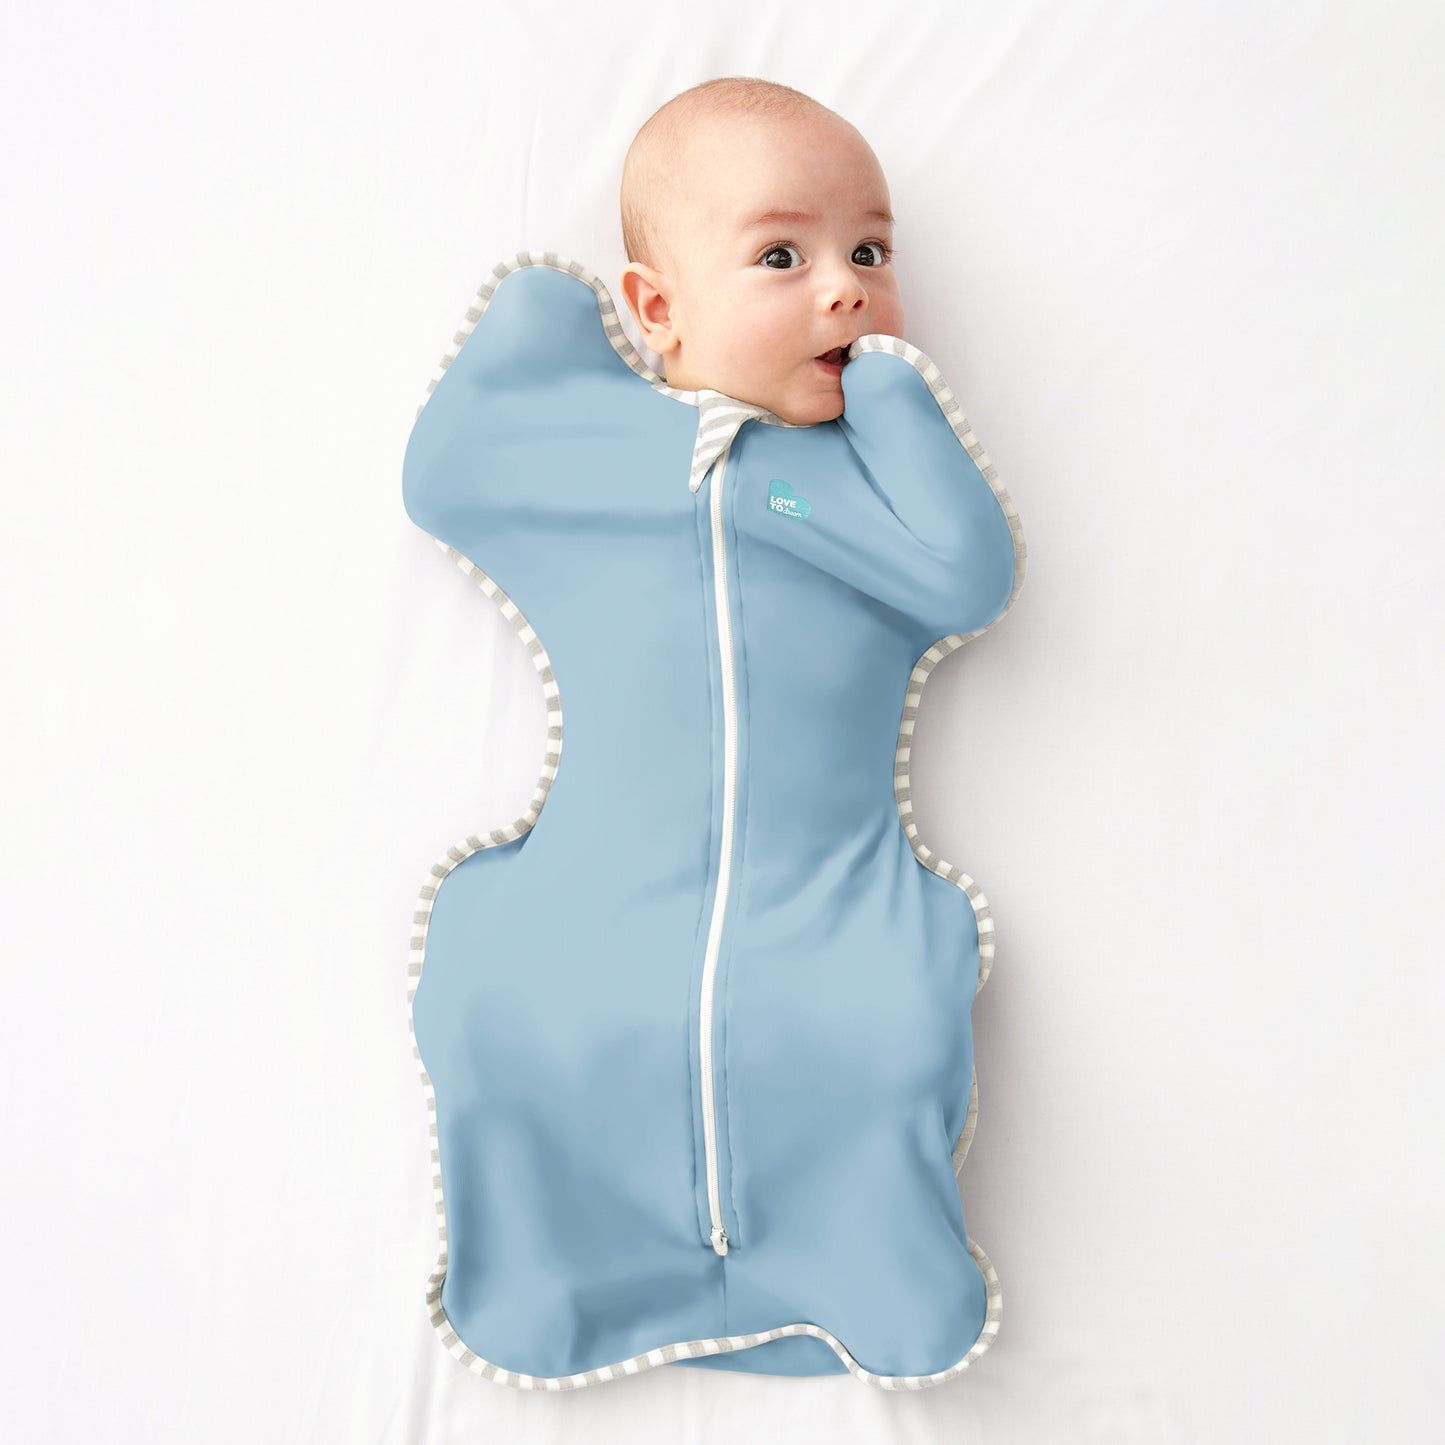 Love To Dream | Swaddle Up 1.0 Tog | Dusty Blue